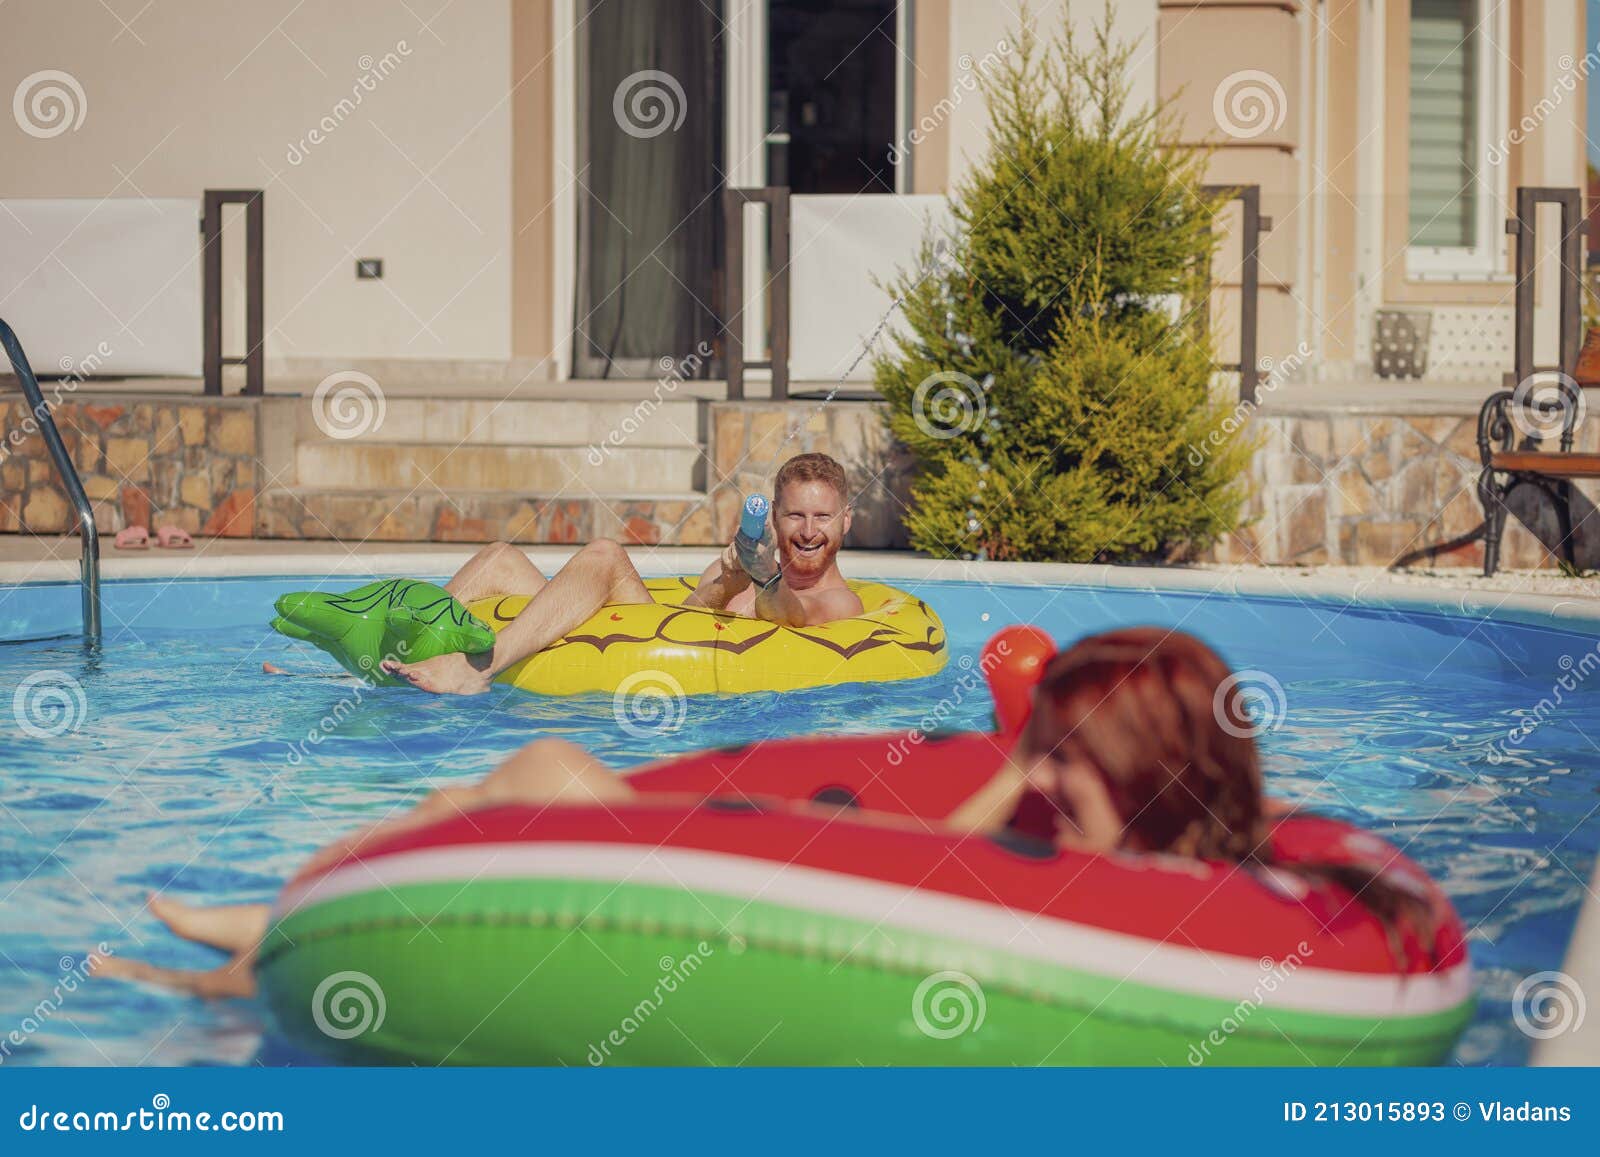 Couple Having Fun Splashing Water On Each Other At The Swimming Pool